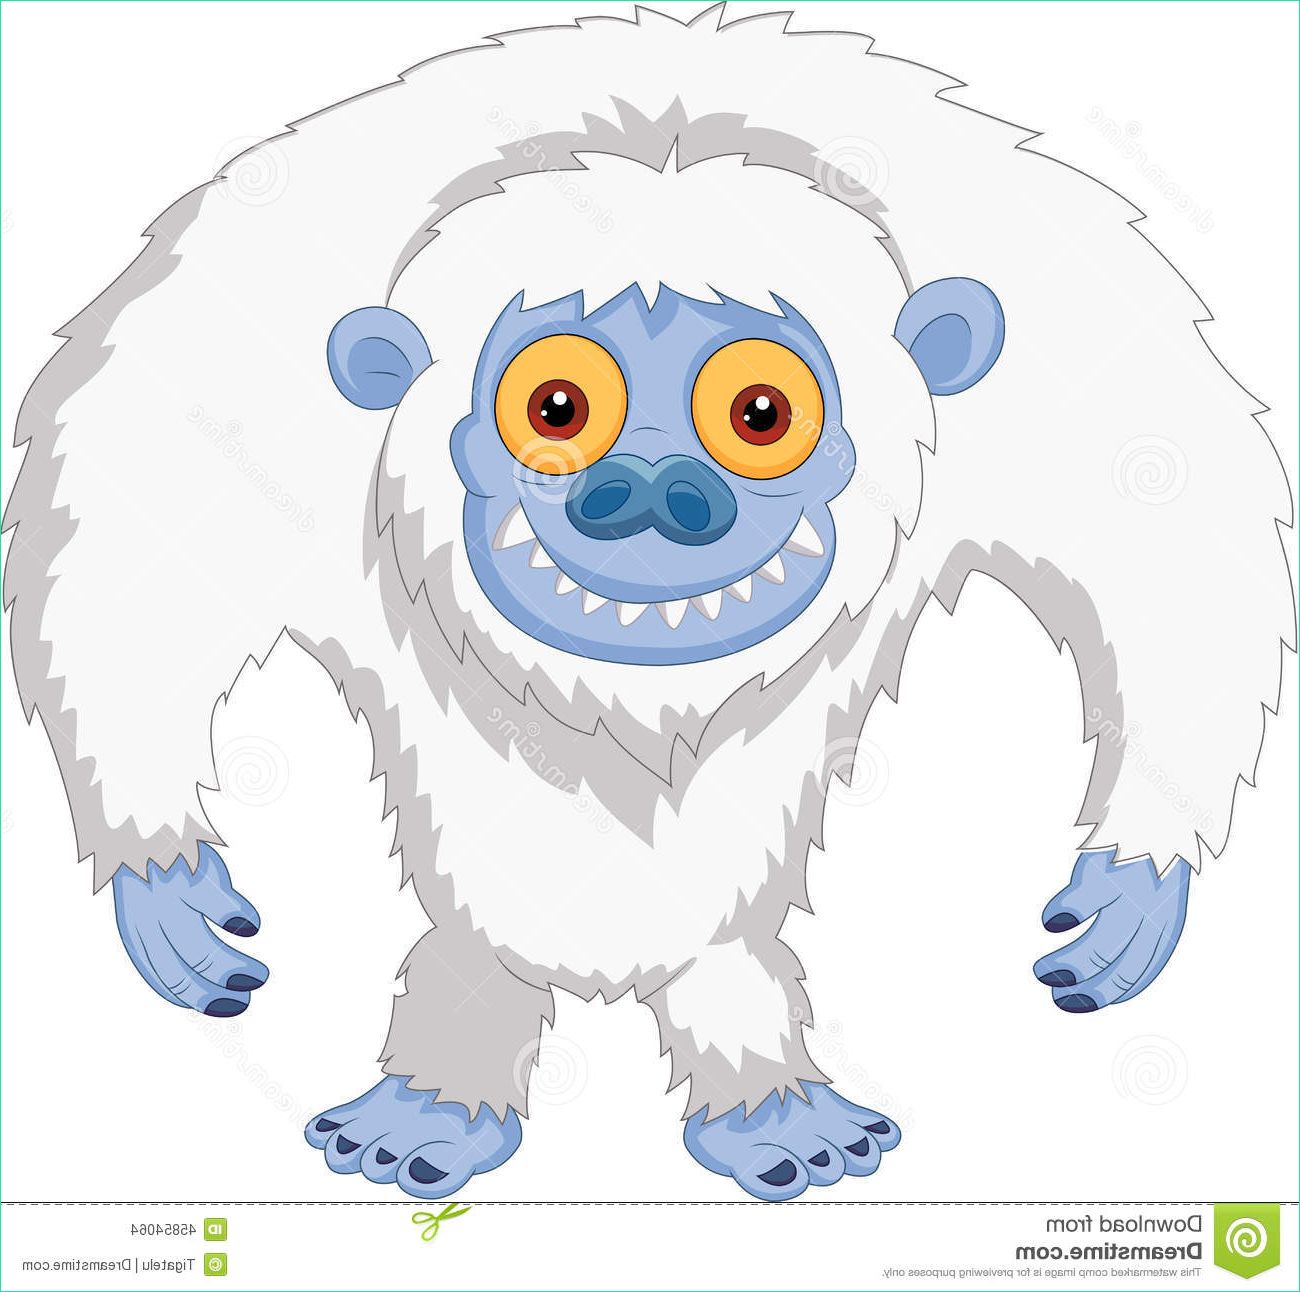 Yeti Dessin Nouveau Collection yeti Clipart Download yeti Clipart for Free 2019